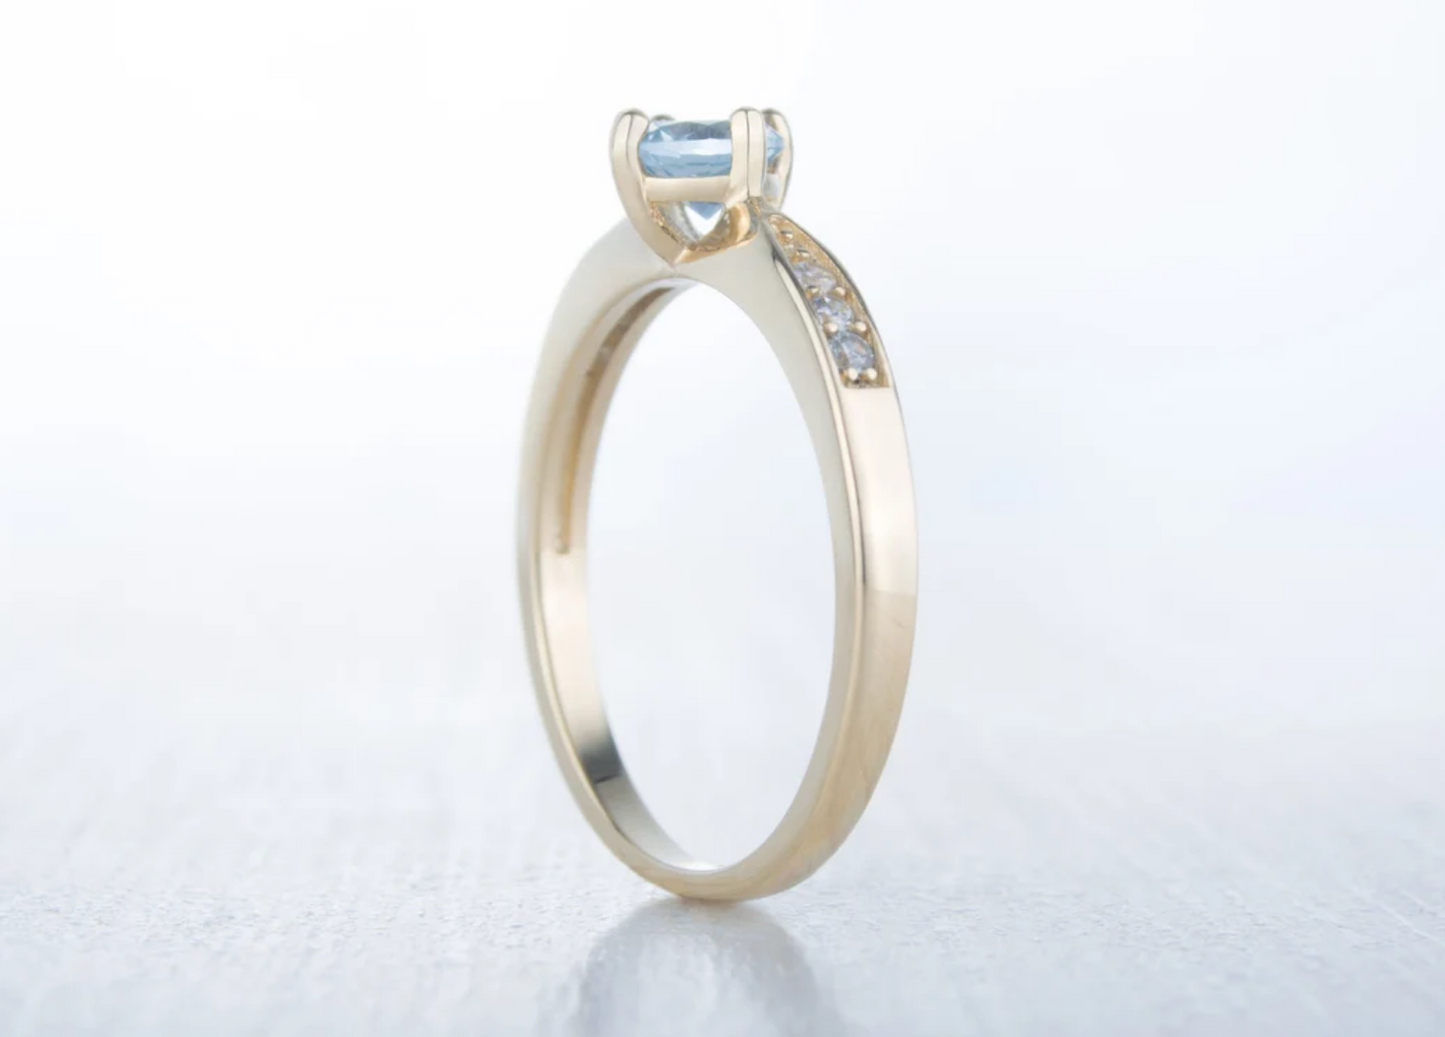 Size O / US 7 10K Solid Yellow Gold and Aquamarine Engagement ring.